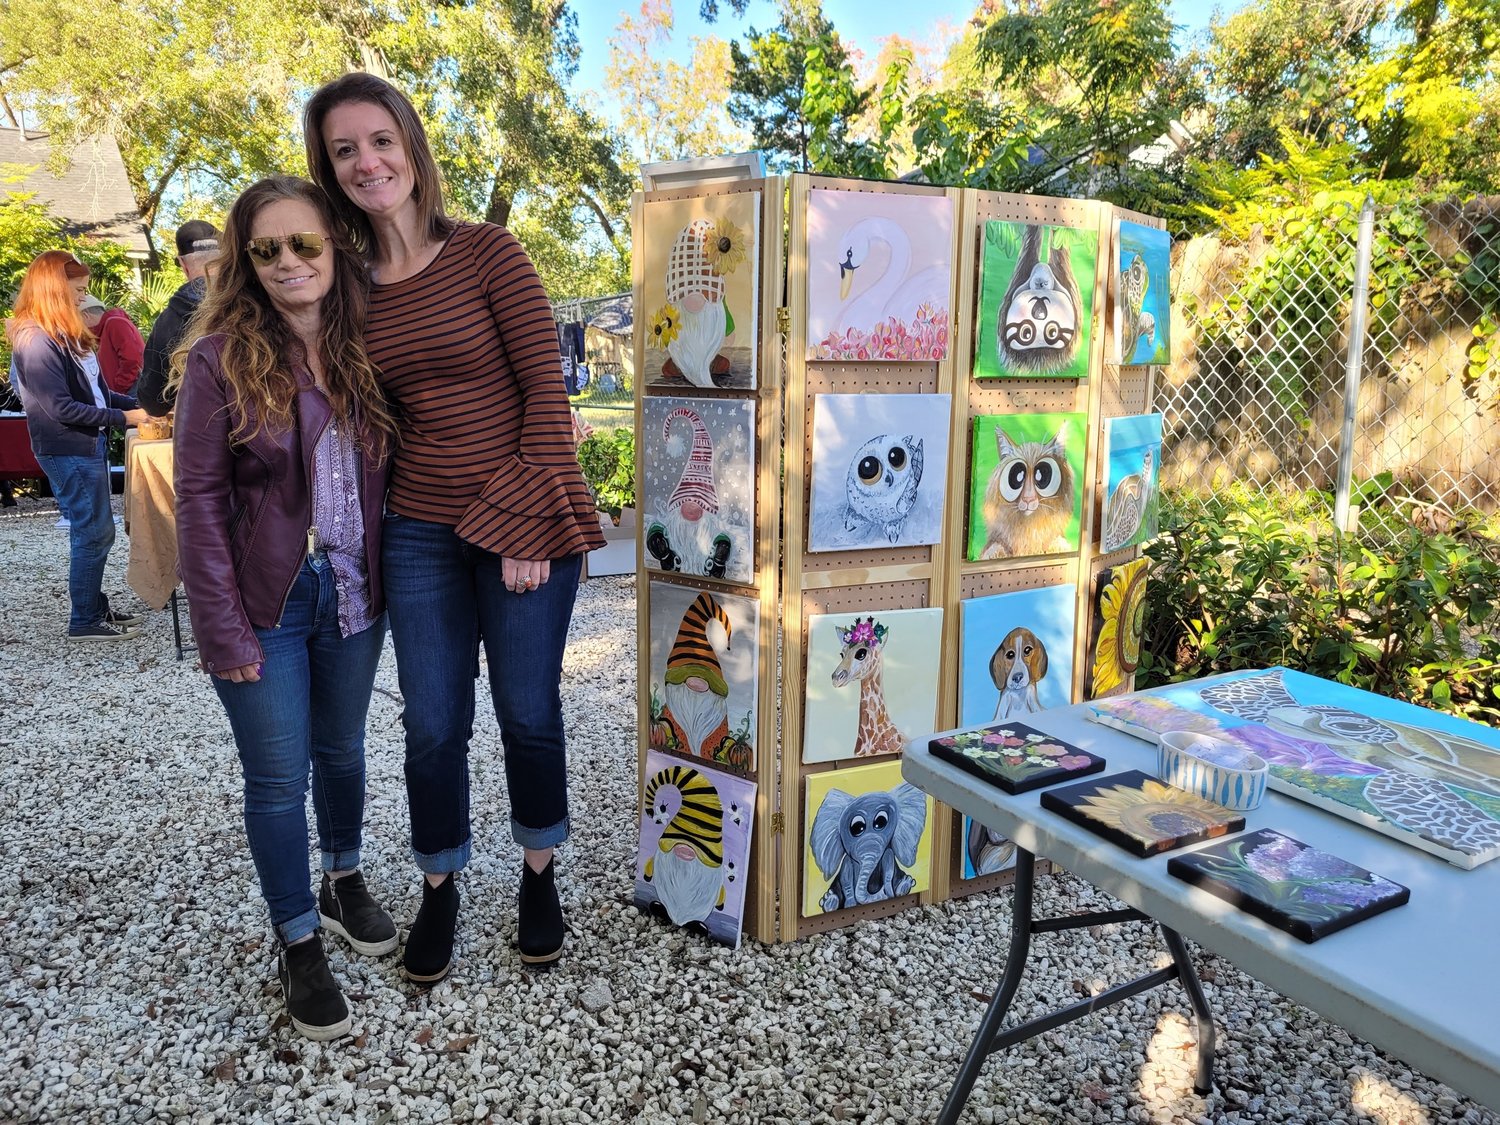 Artist Eleanor Crosby, left, and Dr. Carla Rodrigues at the Artisans Market fundraiser for Celestial Farms.